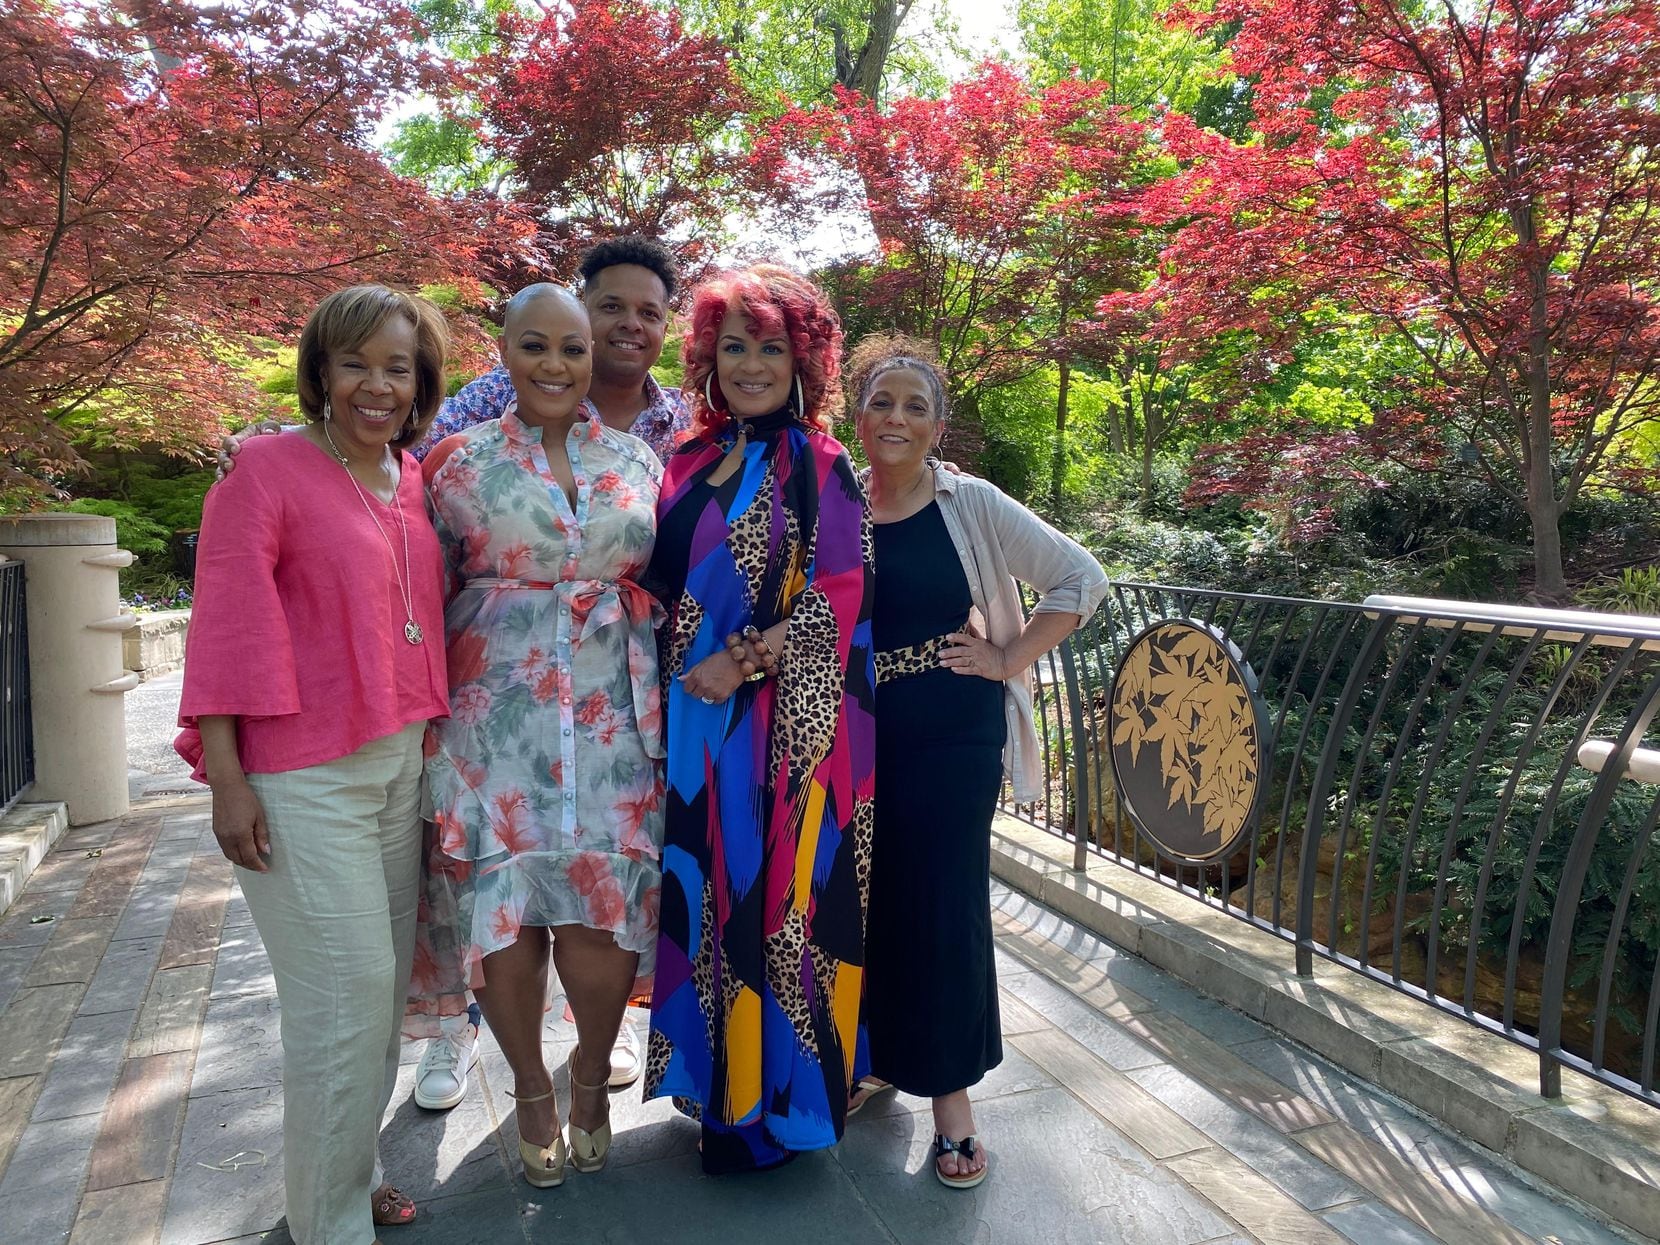 Linda Todd (from left), Anita Hawkins, Willie Johnson, LeTitia Owens and Janet Jack were on the Crown Jewel Fashion Show team at the Dallas Arboretum’s Black Heritage Celebration on May 1.